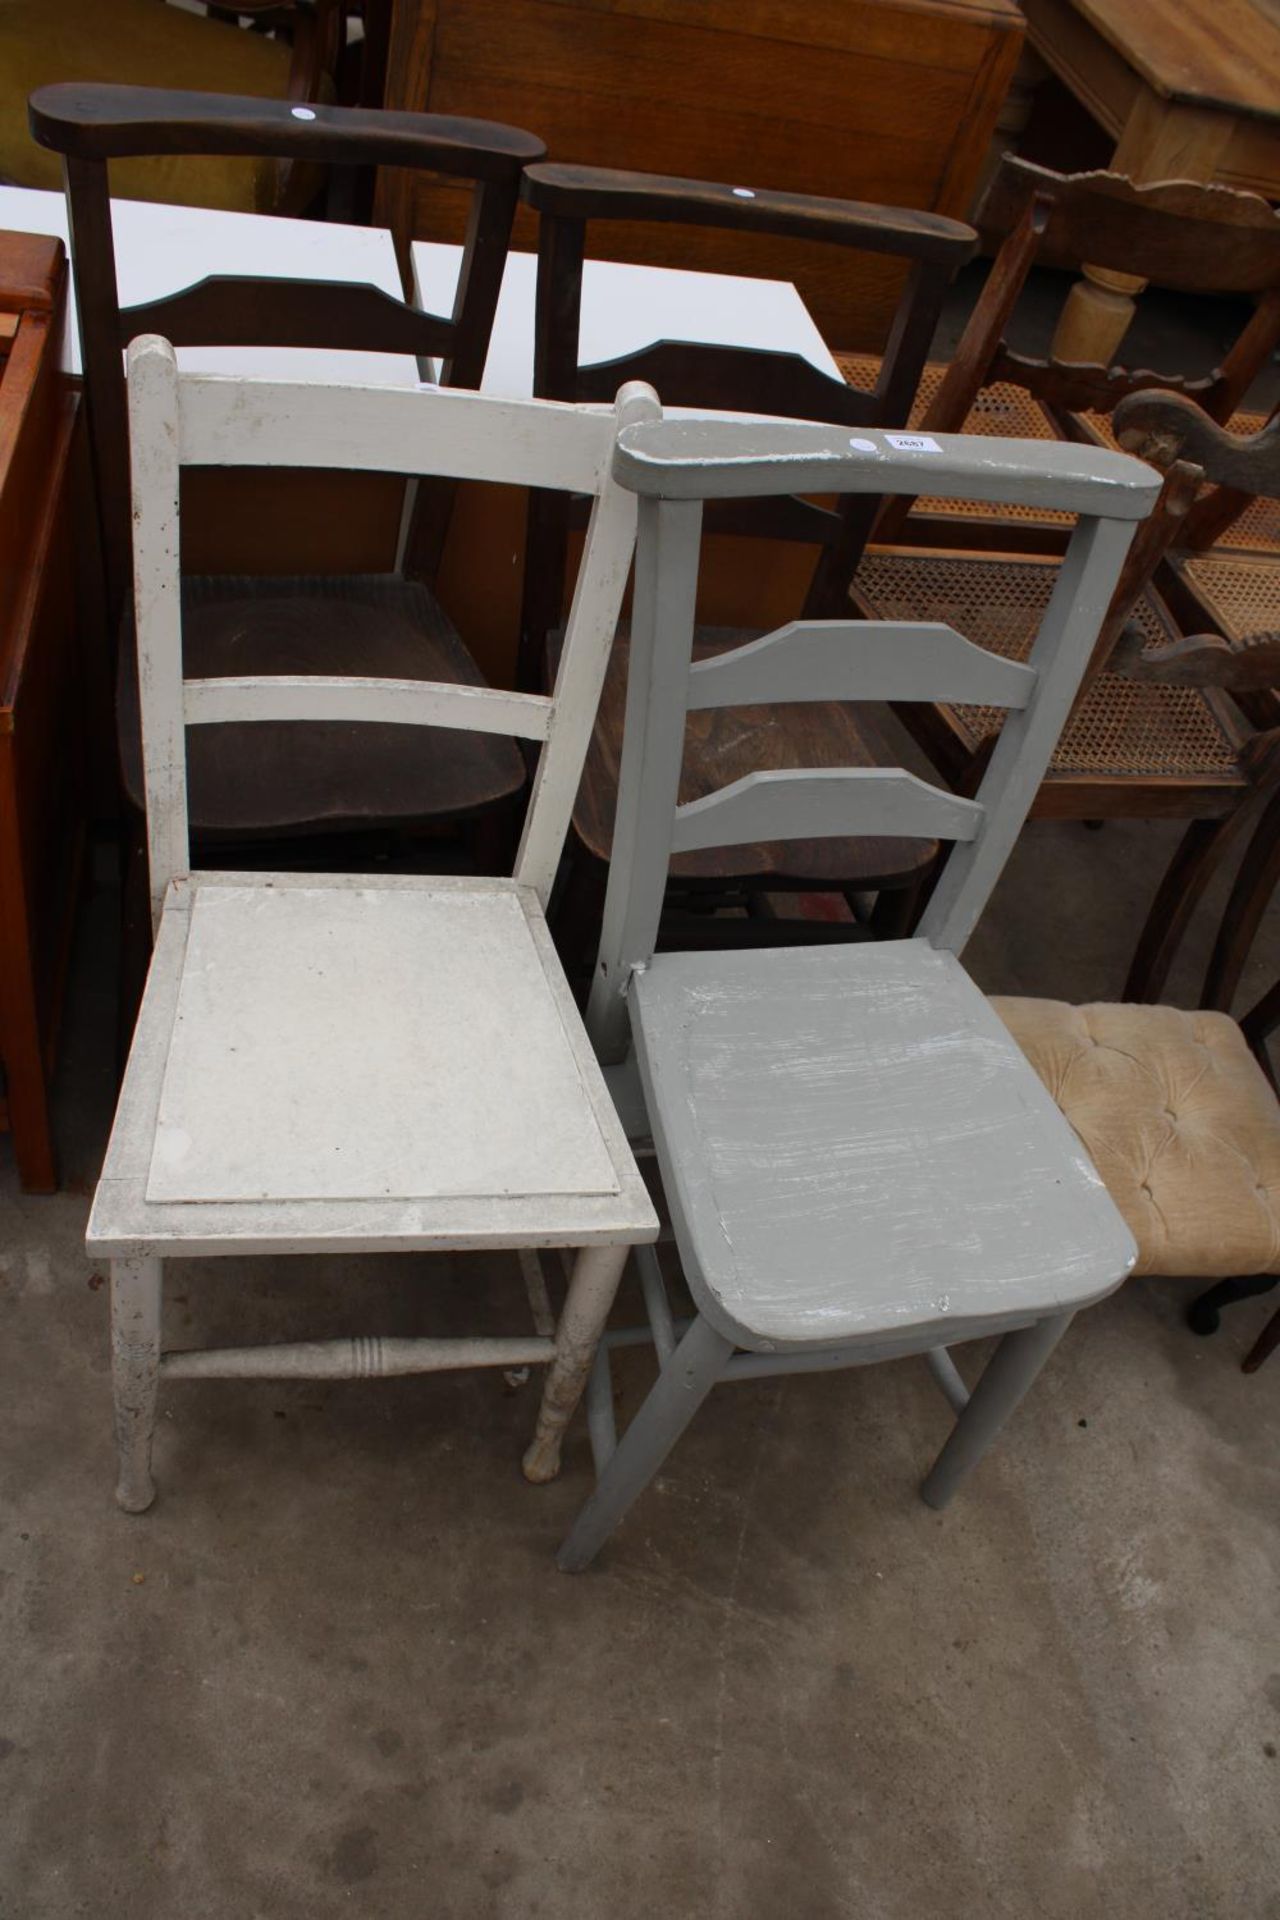 THREE PAINTED CHAPEL STYLE CHAIRS AND A BEDROOM CHAIR